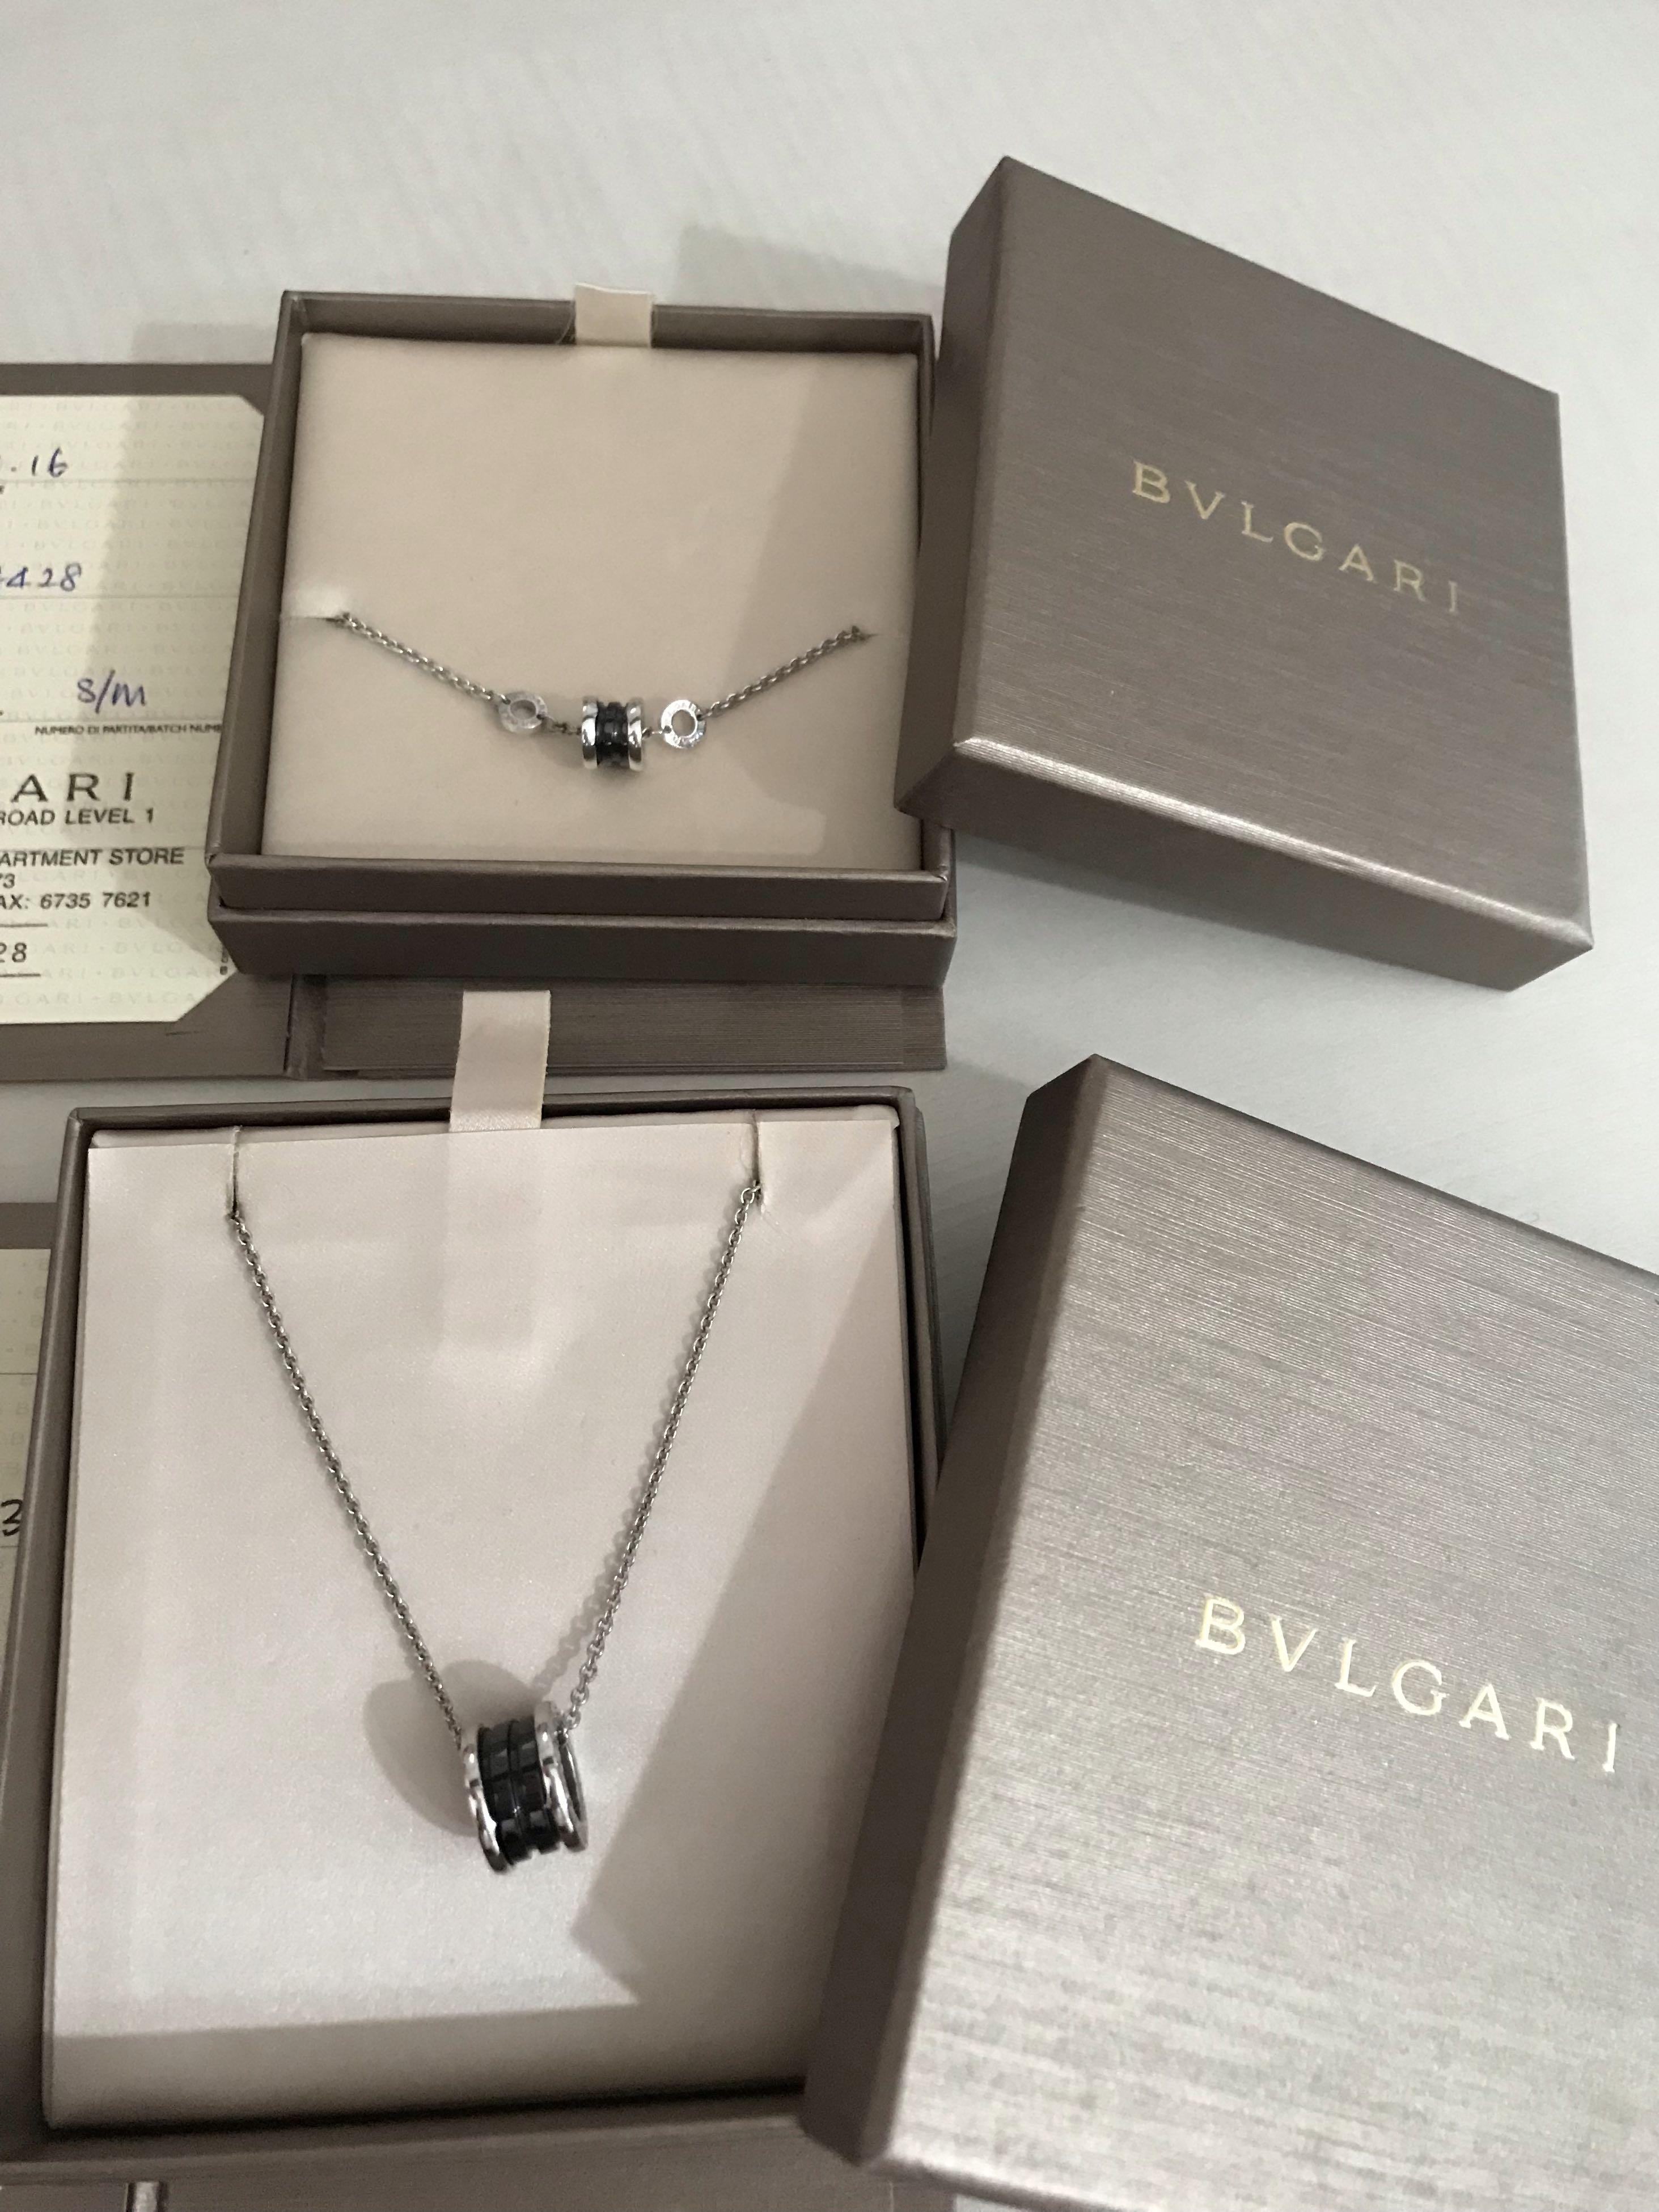 Bulgari Save the Children Necklace and 